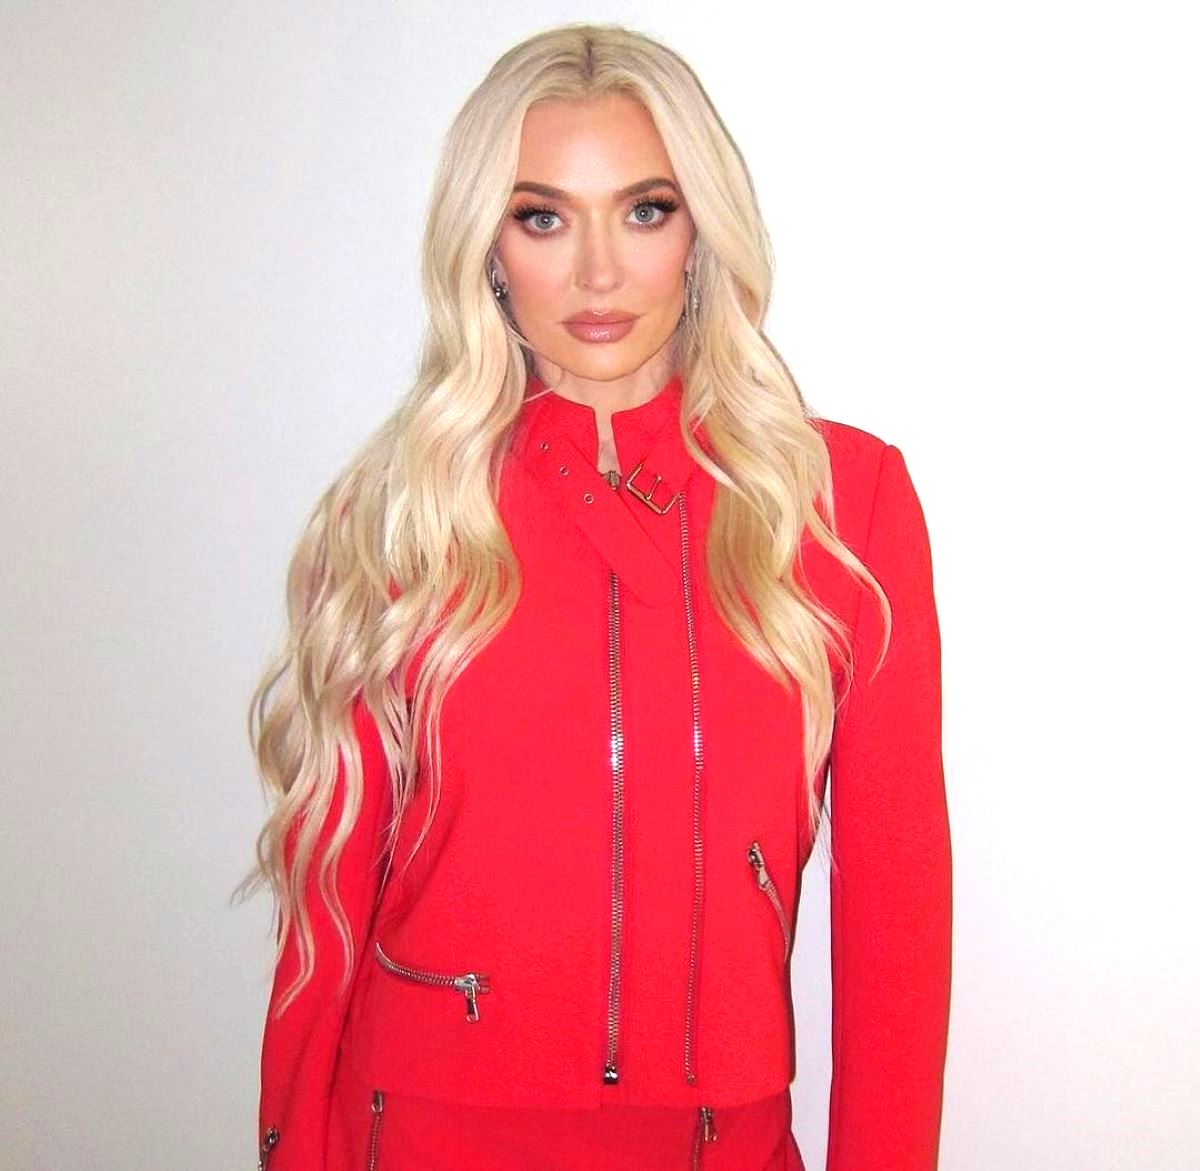 PHOTOS: 'RHOBH' Star Erika Jayne Shows Off Impressive Weight Loss as She Takes Fans Inside Her Workout Routine With Rumored Flame Keith Hodges